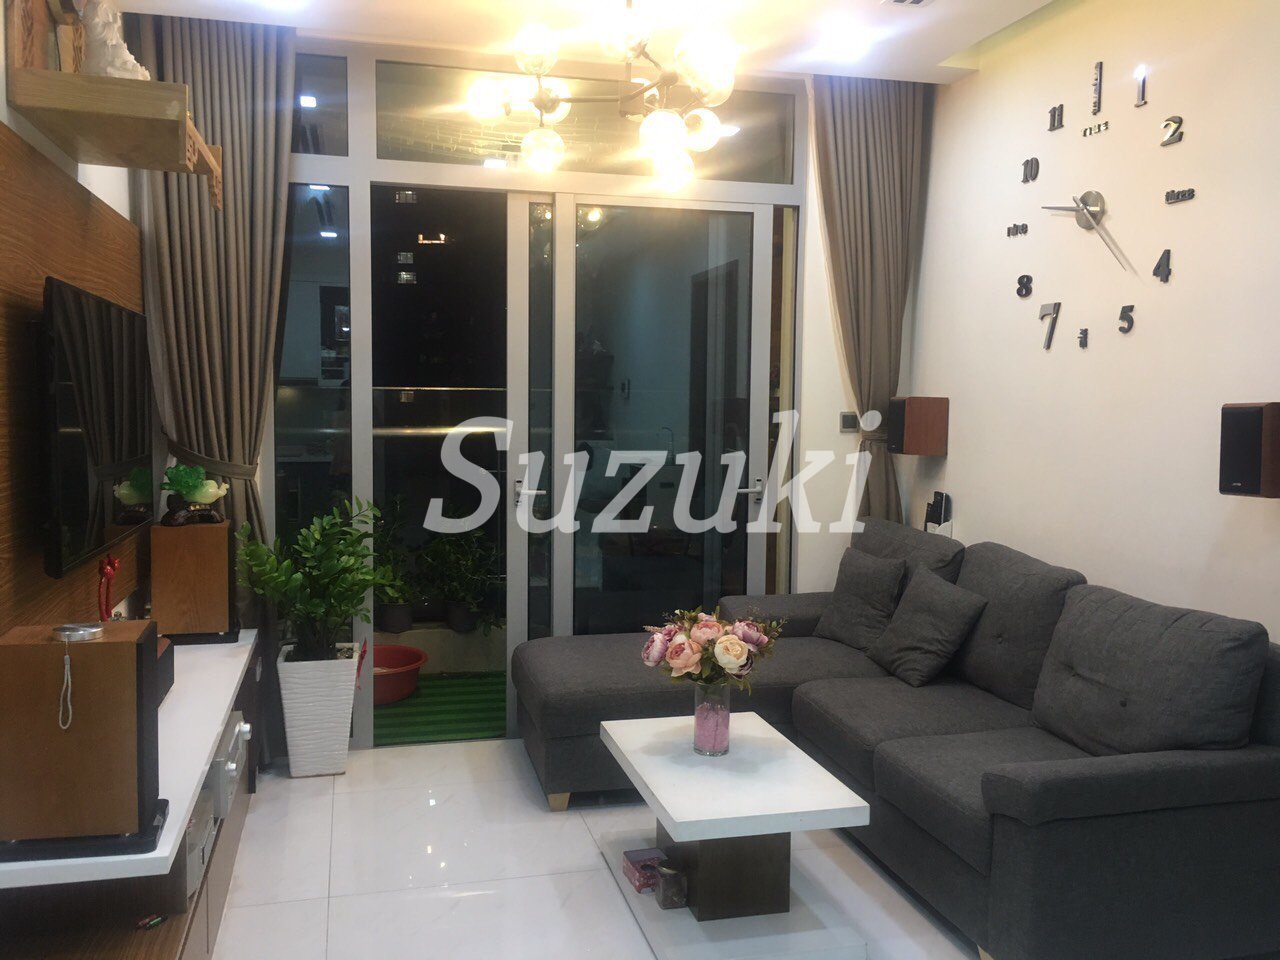 2LDK for rent 73 square meters-1000$-ST105P074 | Vinhomes Central Park, condominium with gym and pool